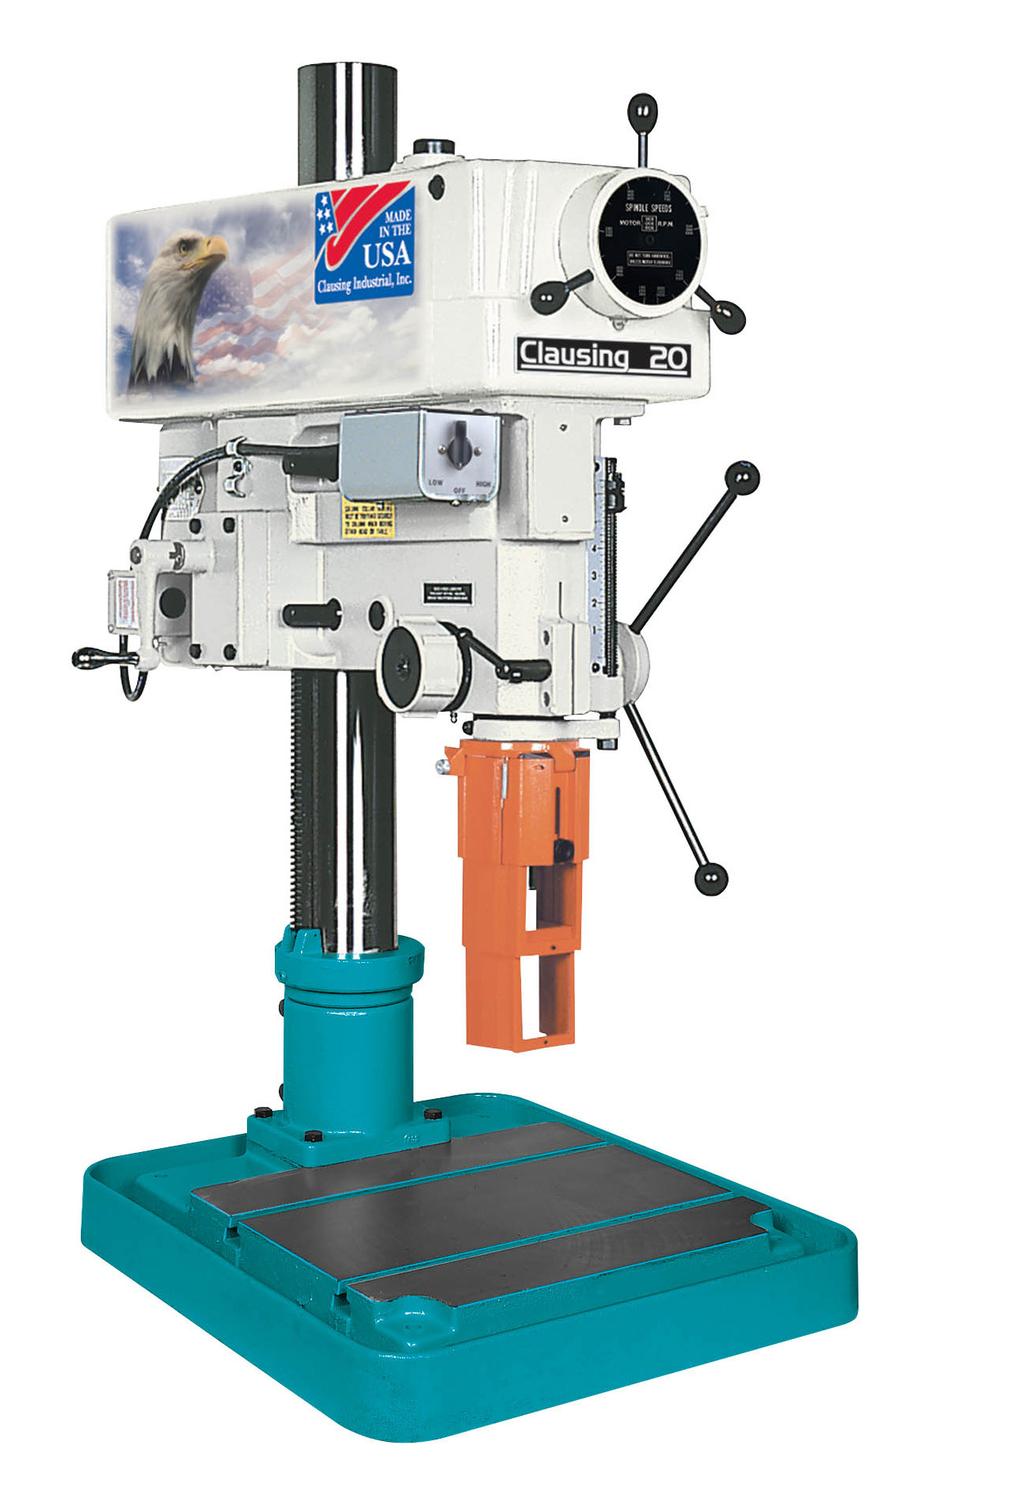 20 HEAD & COLUMN DRILL PRESSES HEAD AND COLUMN DRILL PRESSES This drill removes the base and table to allow the user to mount the head assembly on most any table or working surface.